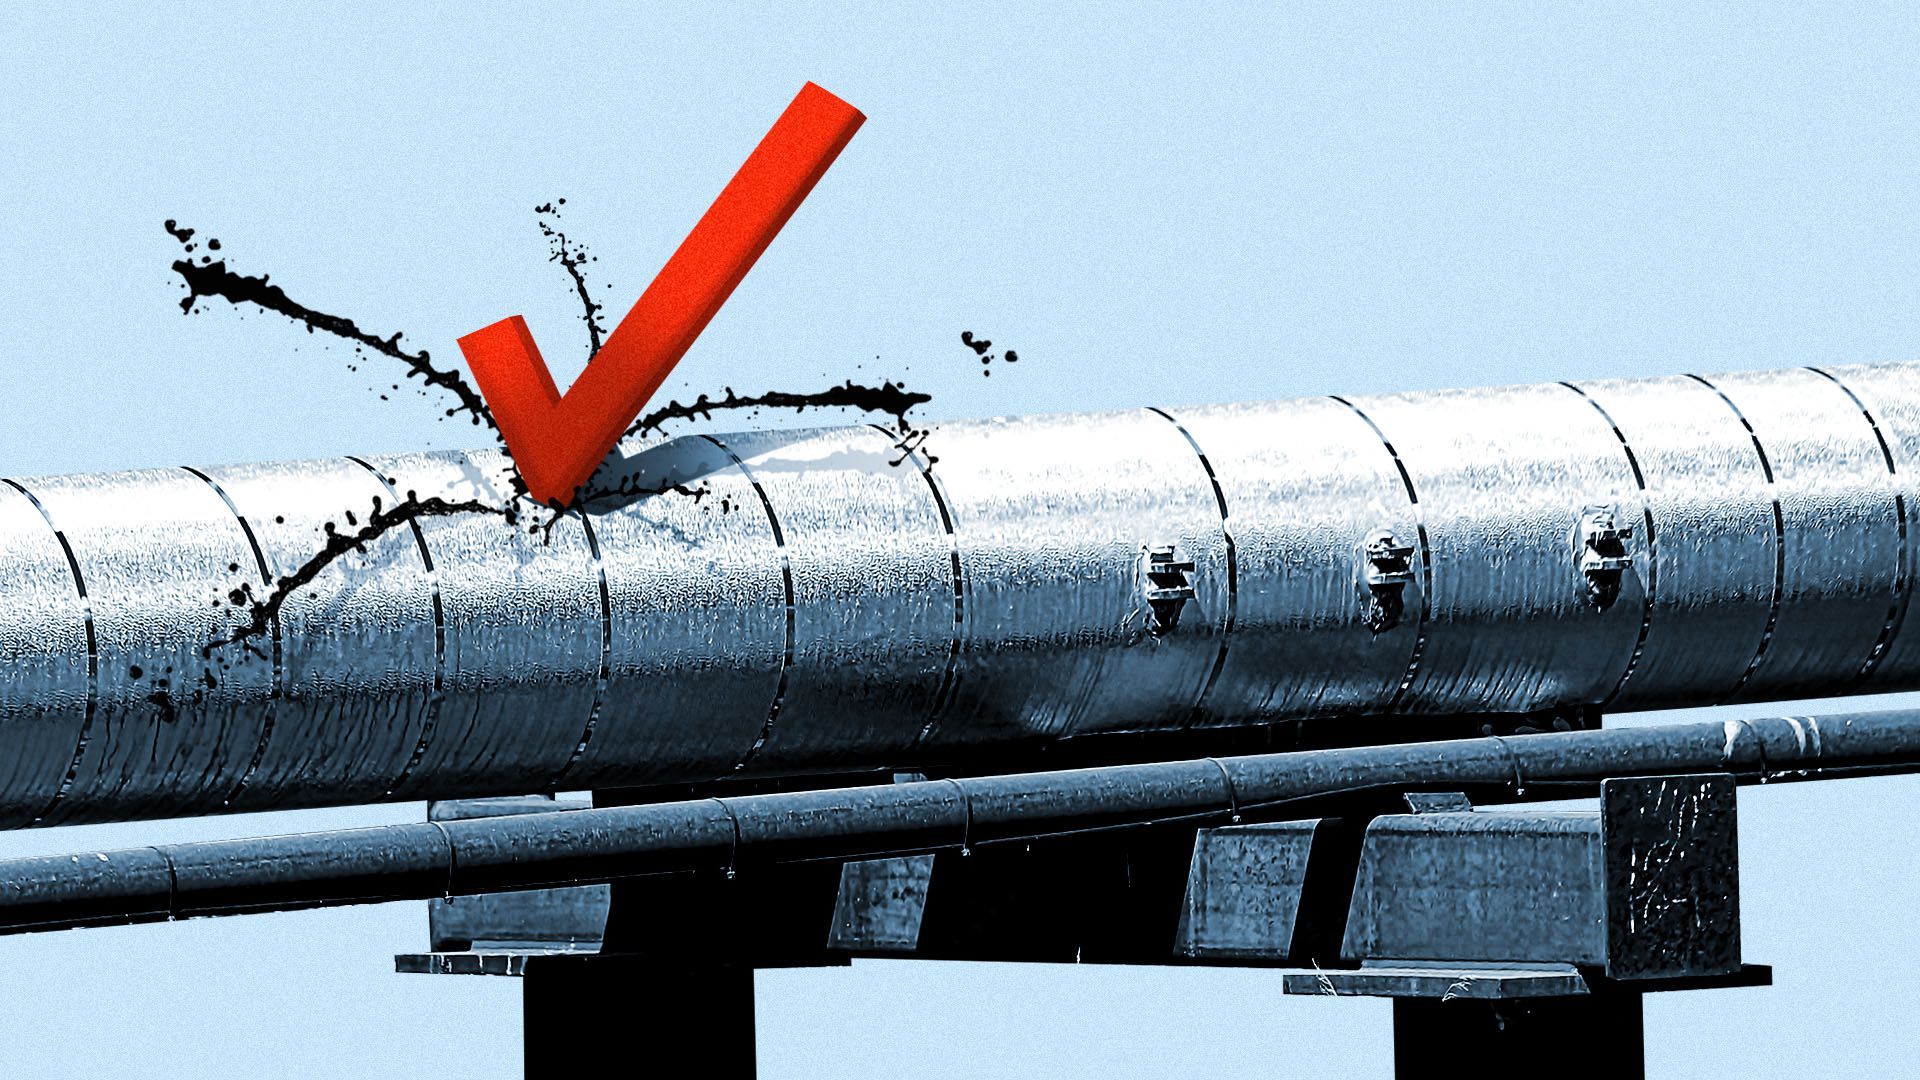 Illustration of a voting checkmark puncturing an oil pipeline